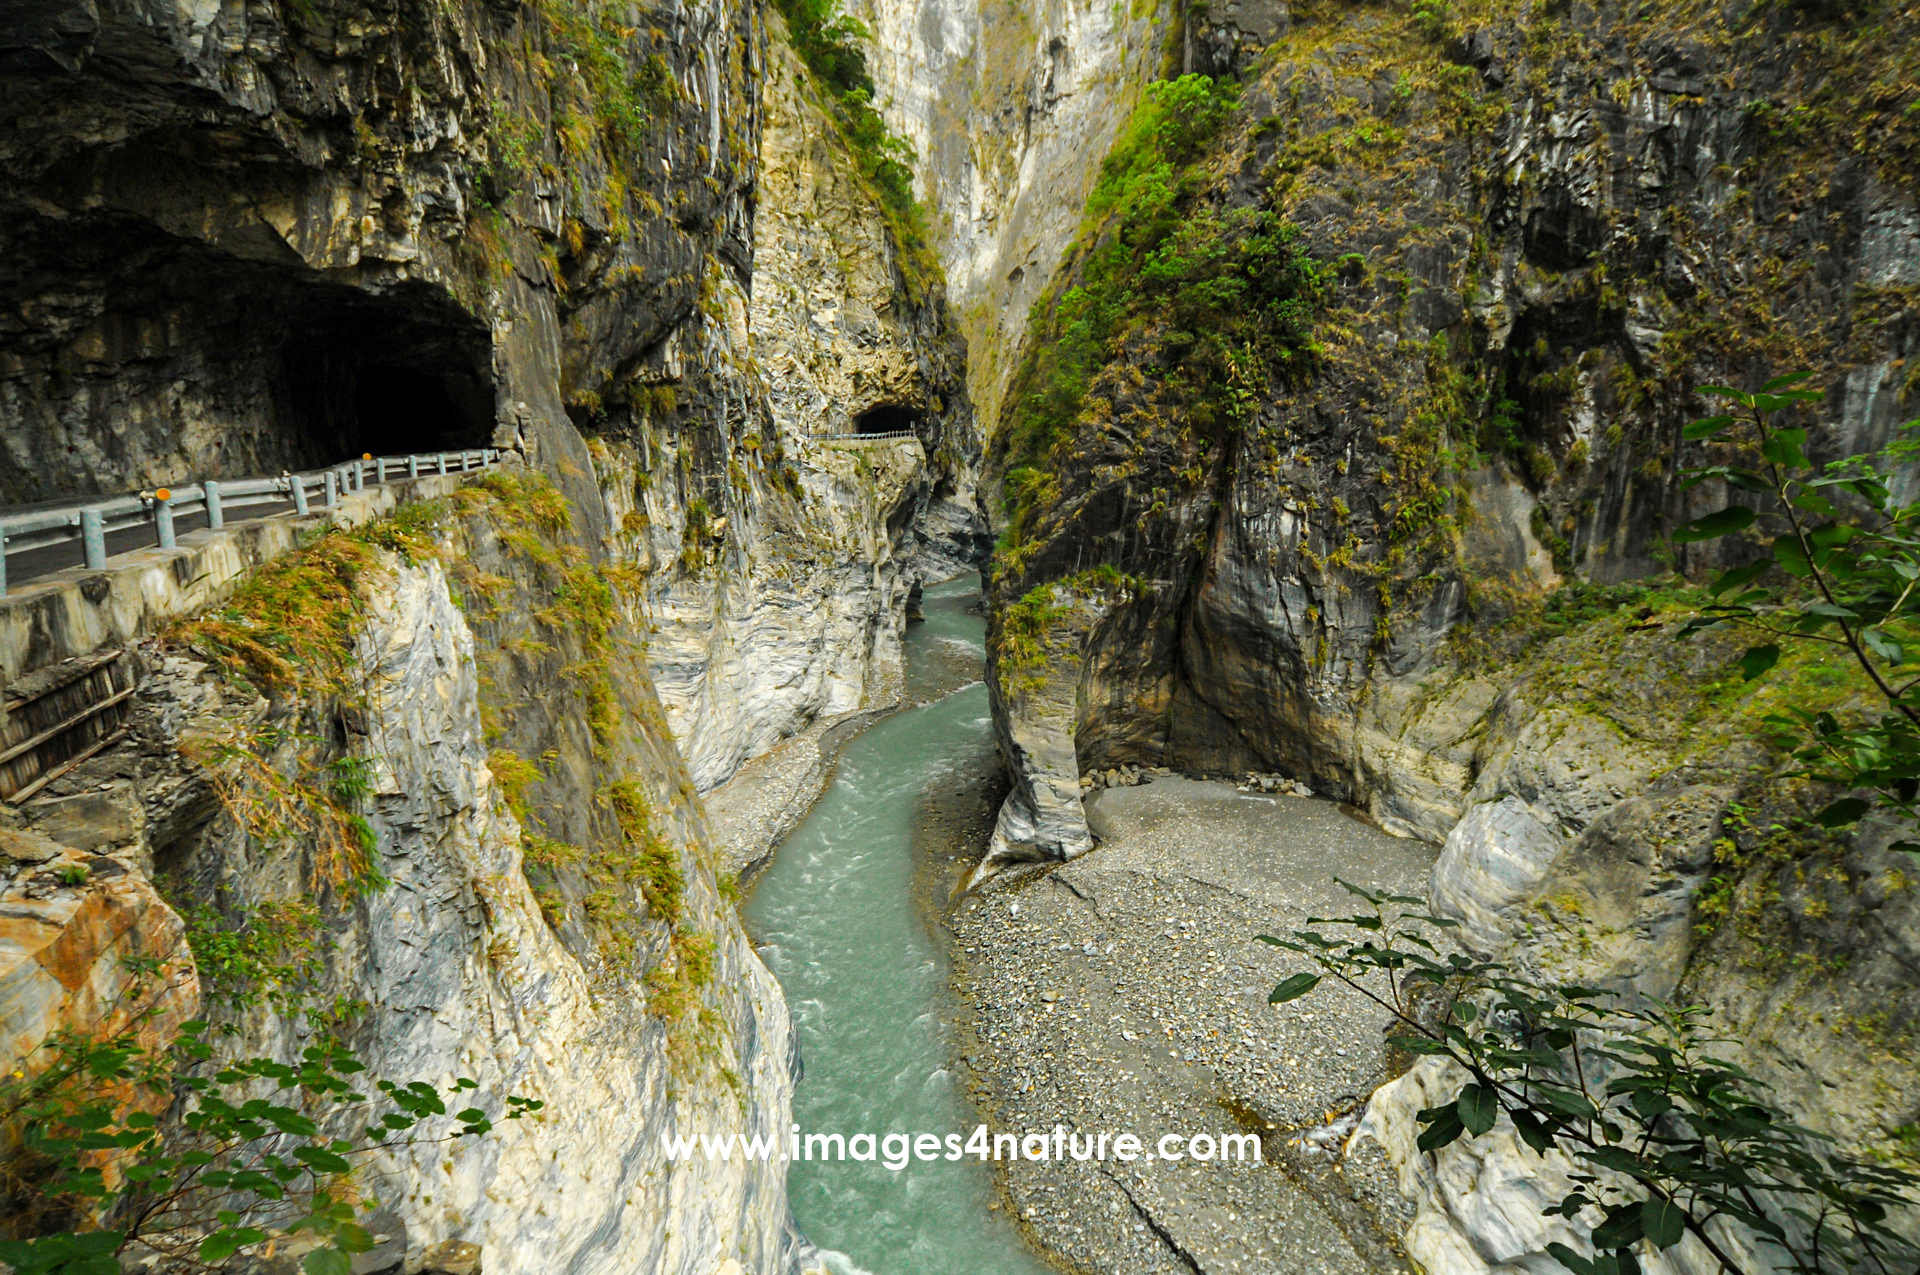 Narrow road with tunnels and clear stream in steep Taroko Gorge